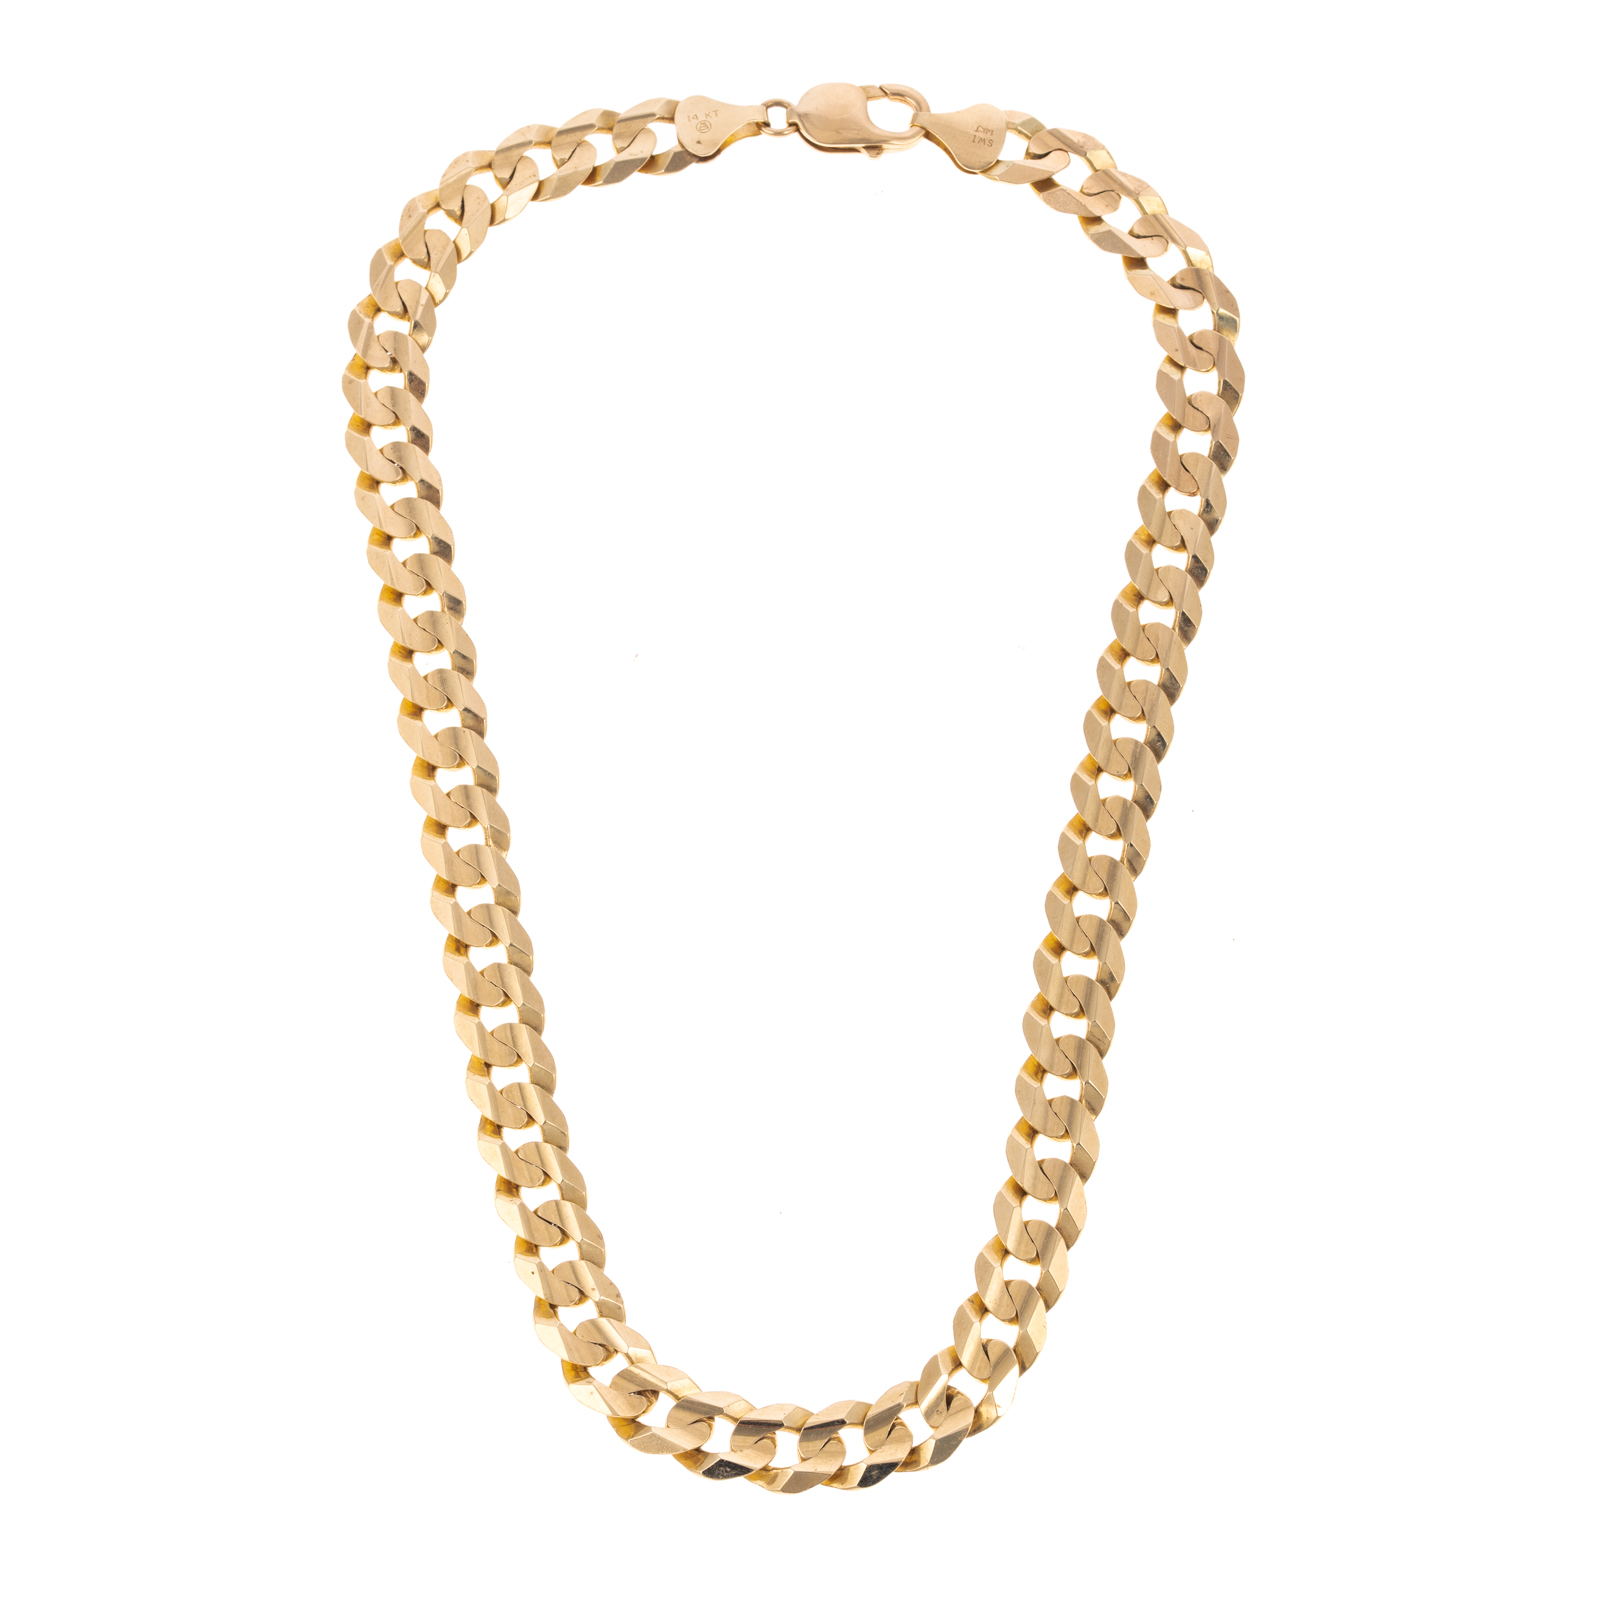 A LARGE ITALIAN 14K CURB LINK NECKLACE 287b2a